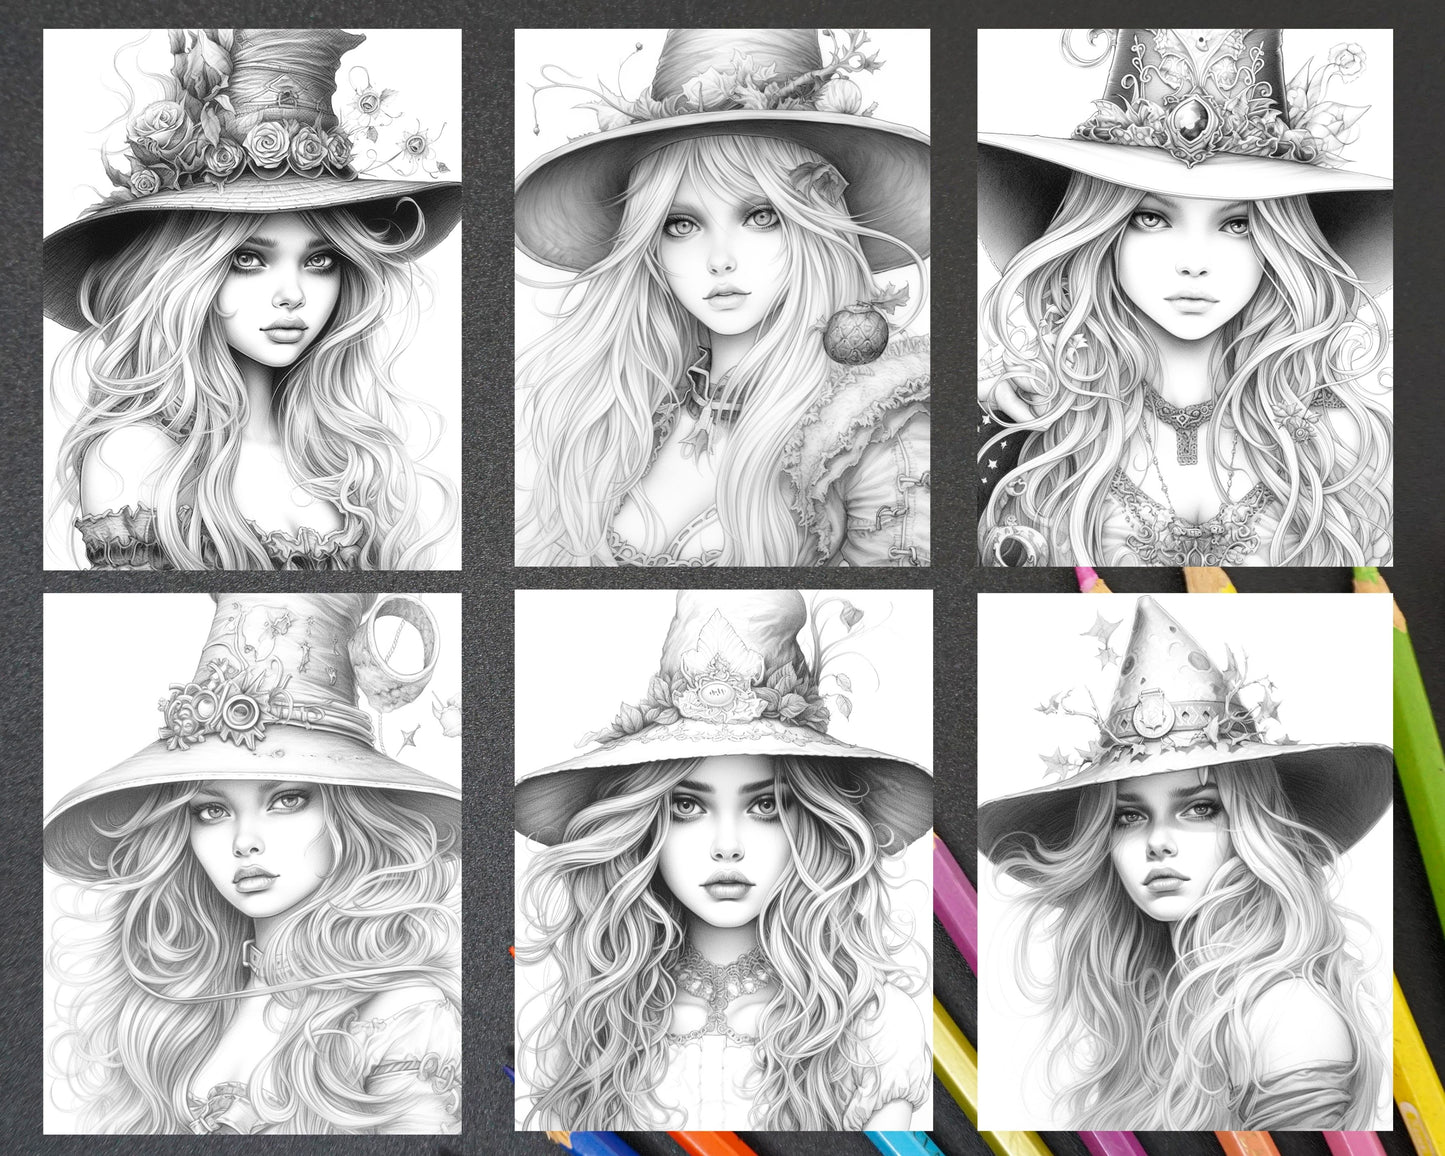 Grayscale coloring pages for adults, Printable witch coloring book, Witchcraft art illustrations, Magical coloring for adults, Halloween witch coloring pages, portrait coloring pages for adults